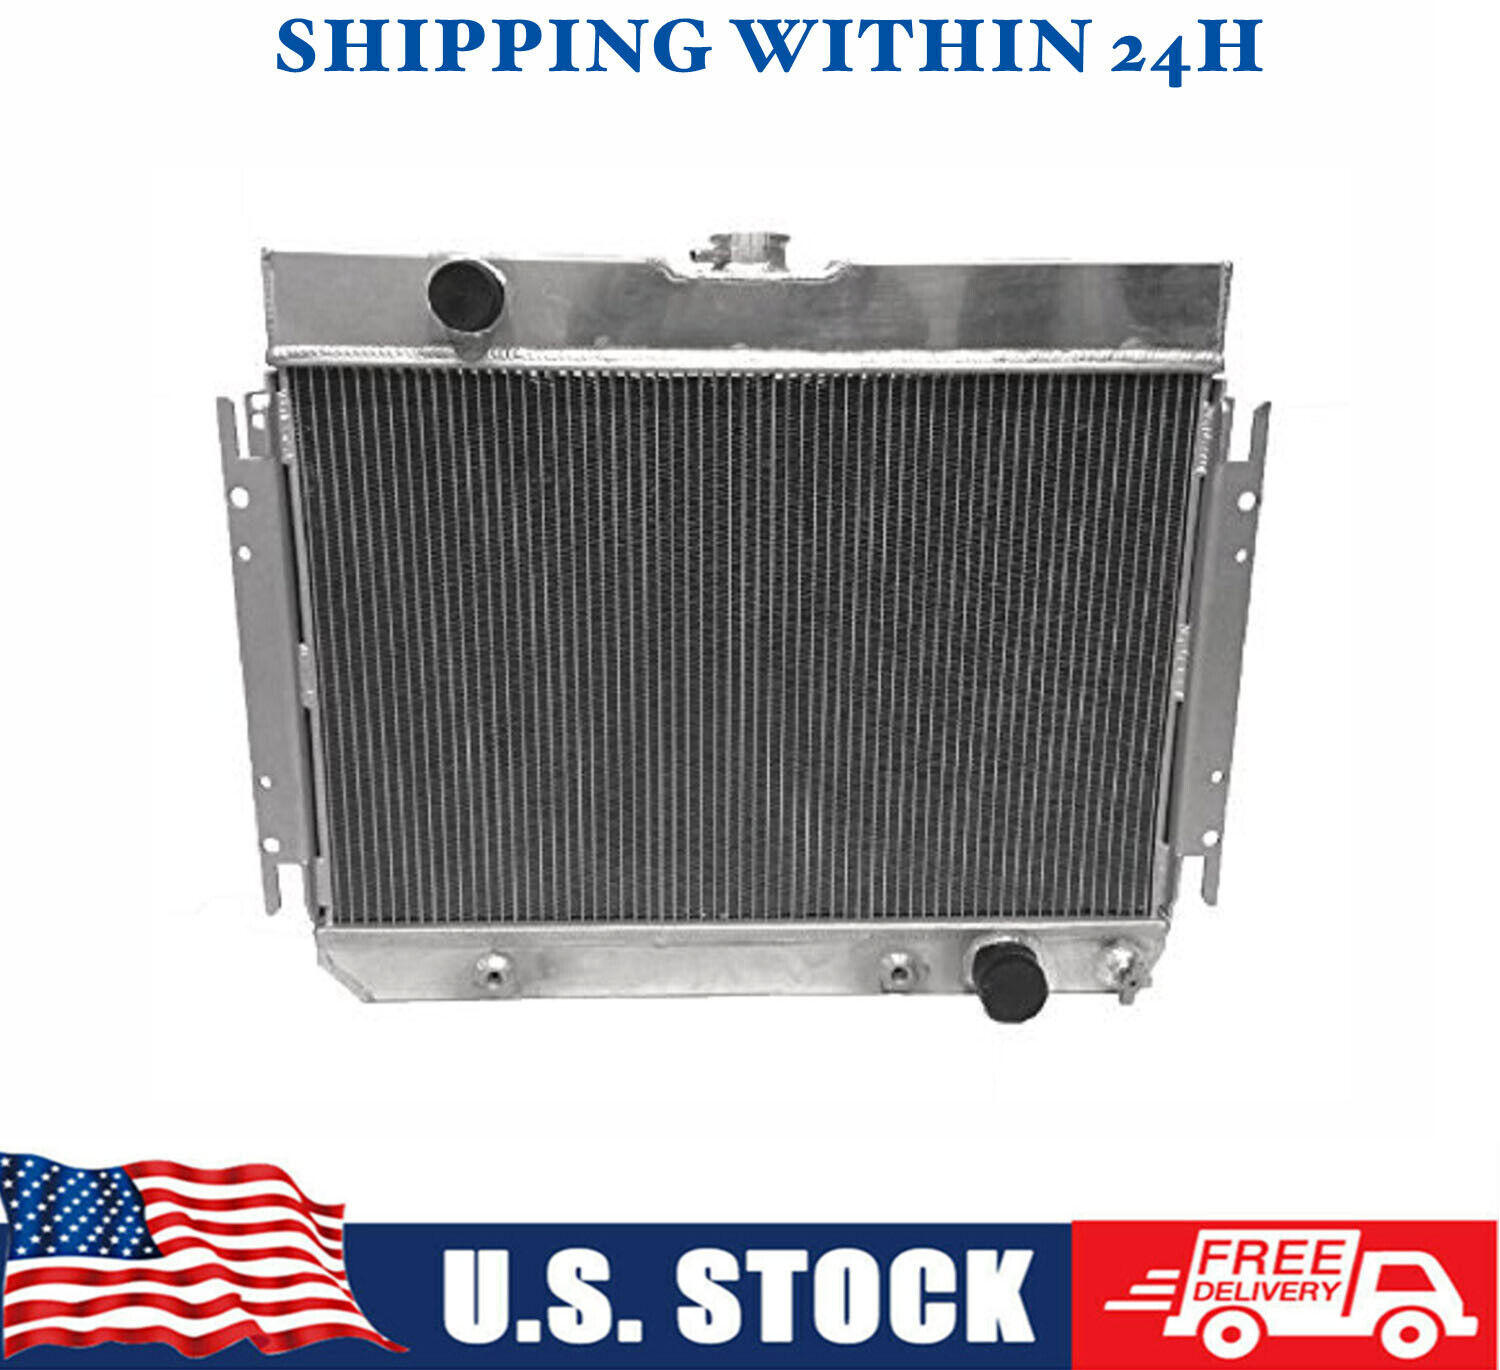 3ROW Radiator For Chevrolet Bel Air /Biscayne/Caprice /Chevelle/Impala 1963-1968